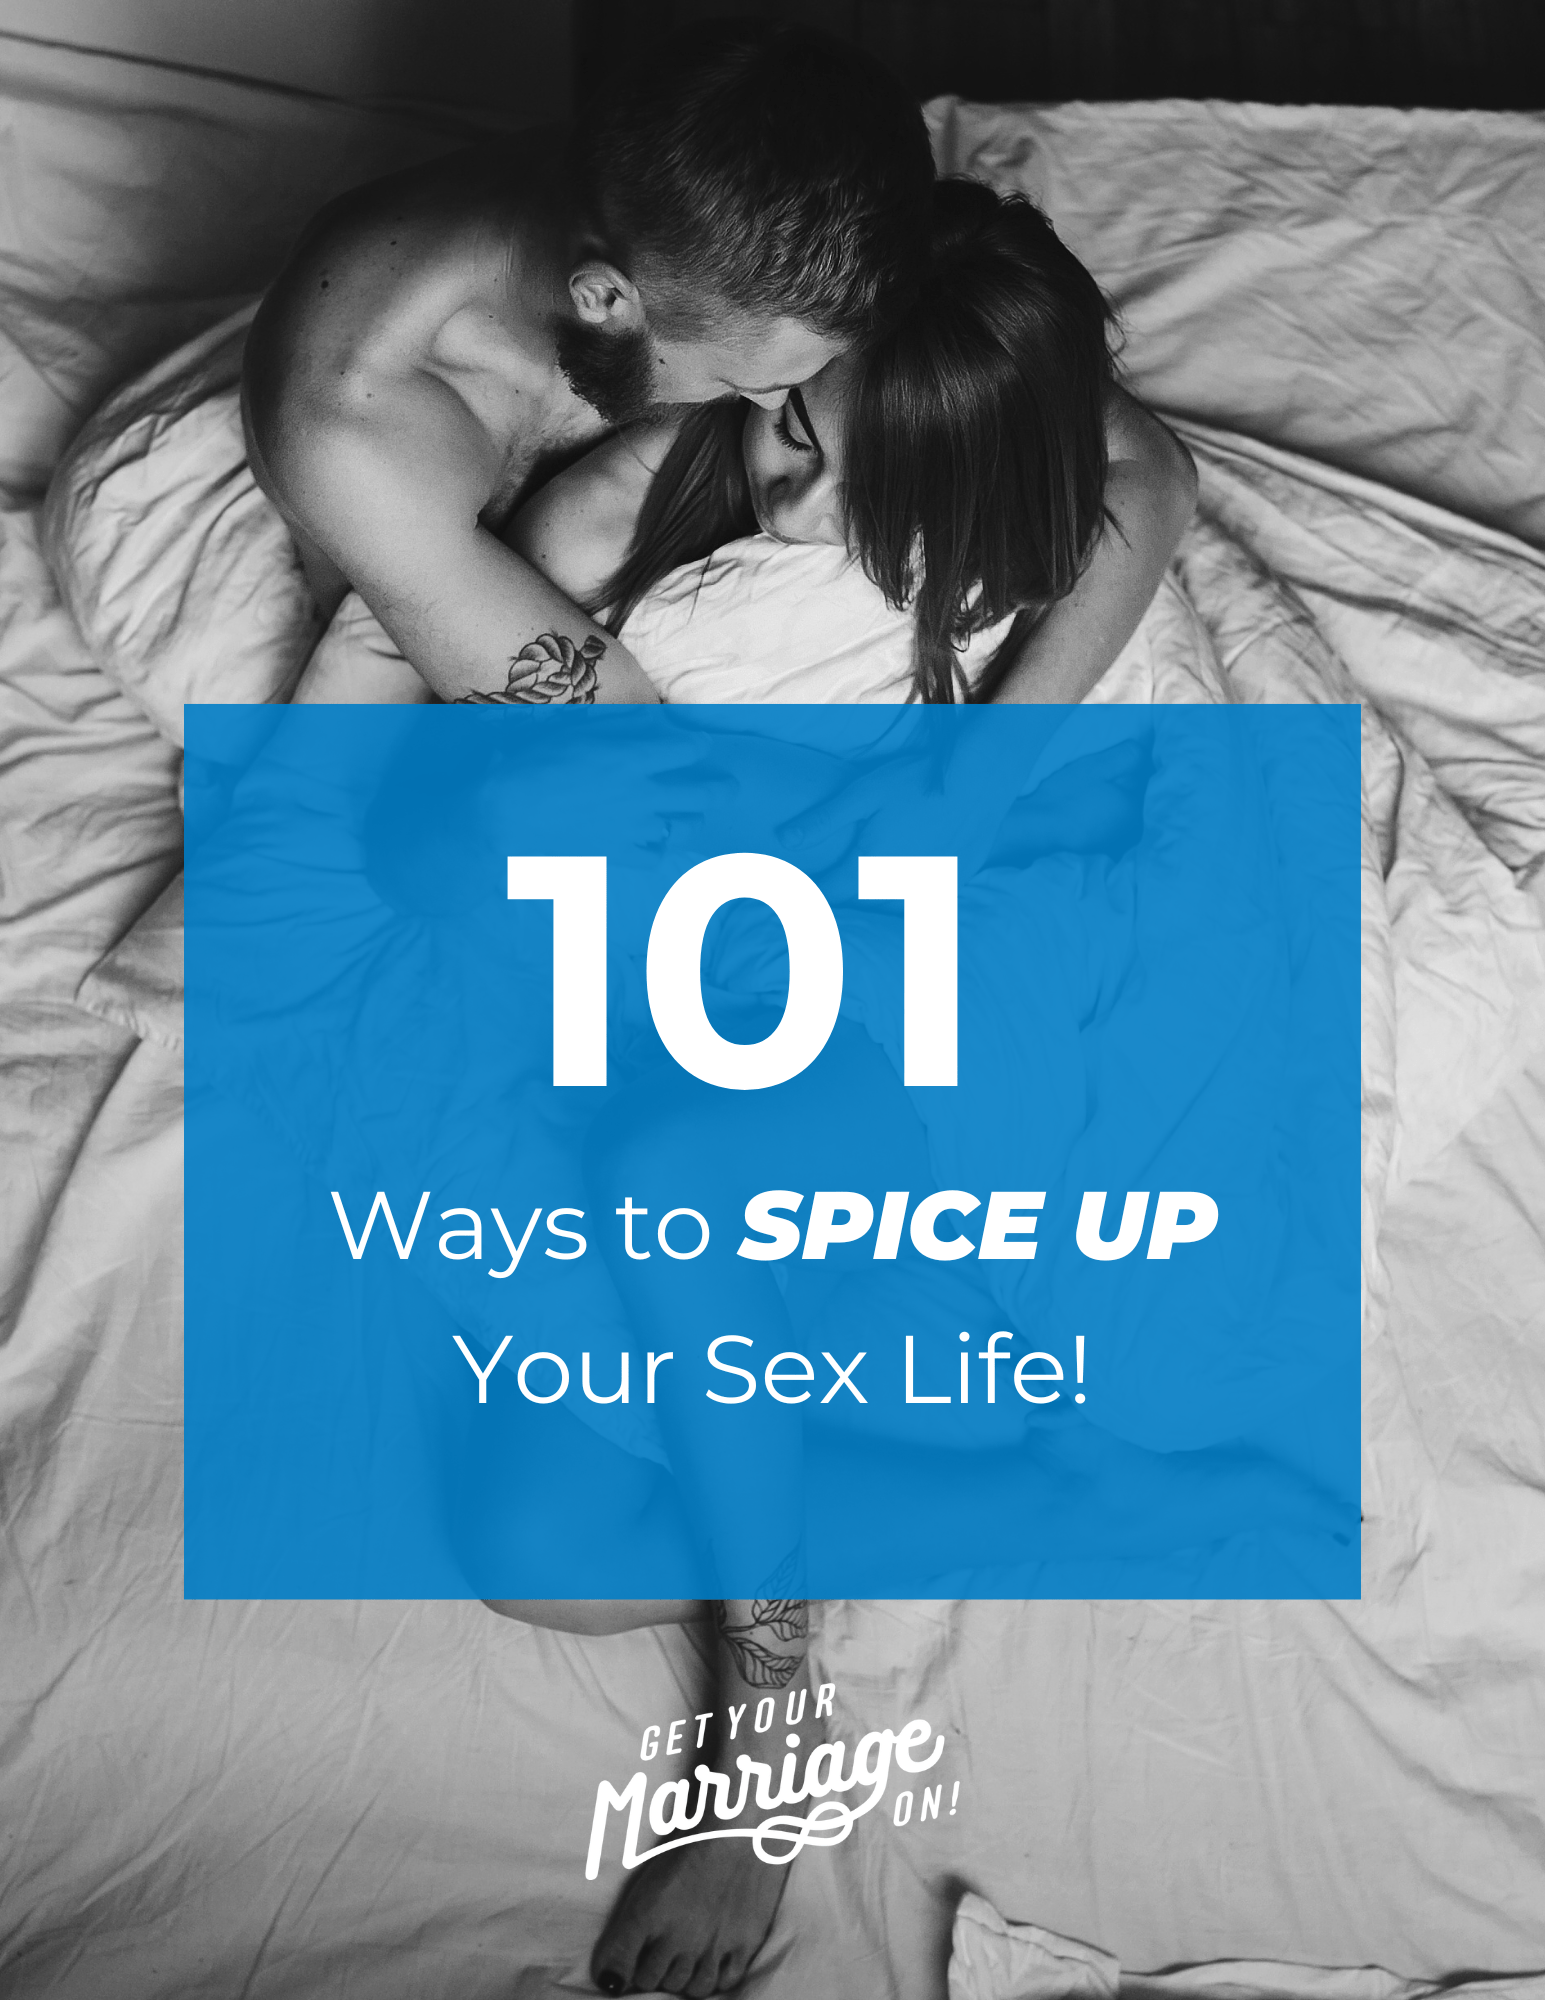 101 Ways To Spice Up Your Sex Life image